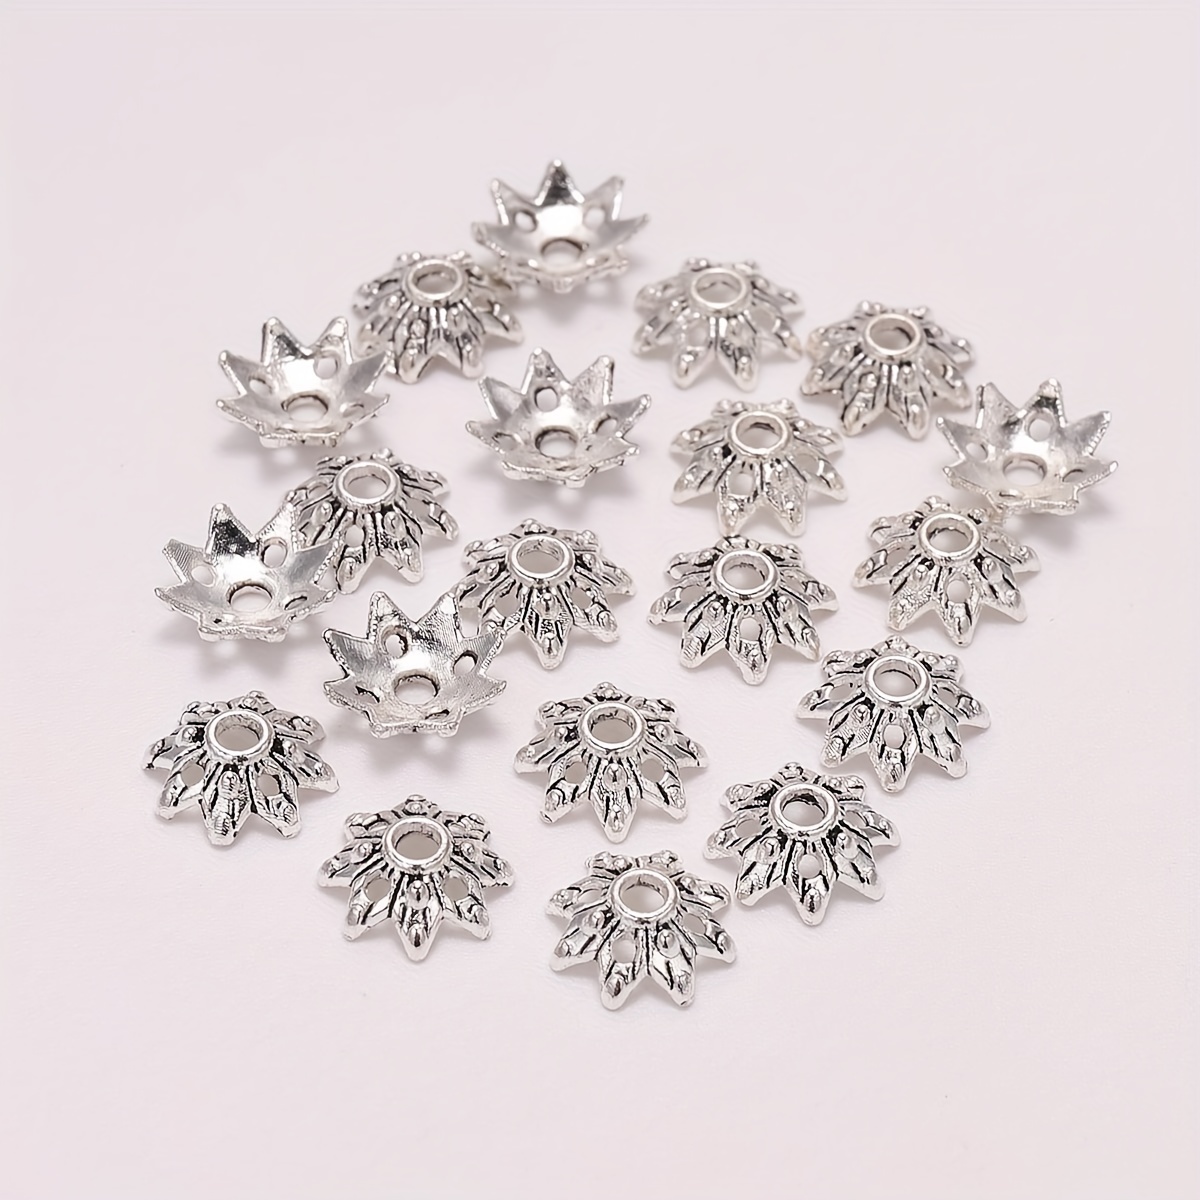 

100pcs Antique Silver Color Flower Bead Caps End Caps Alloy Hollow Beads Caps Beads Holders For Jewelry Making Findings Needlework Diy Accessories